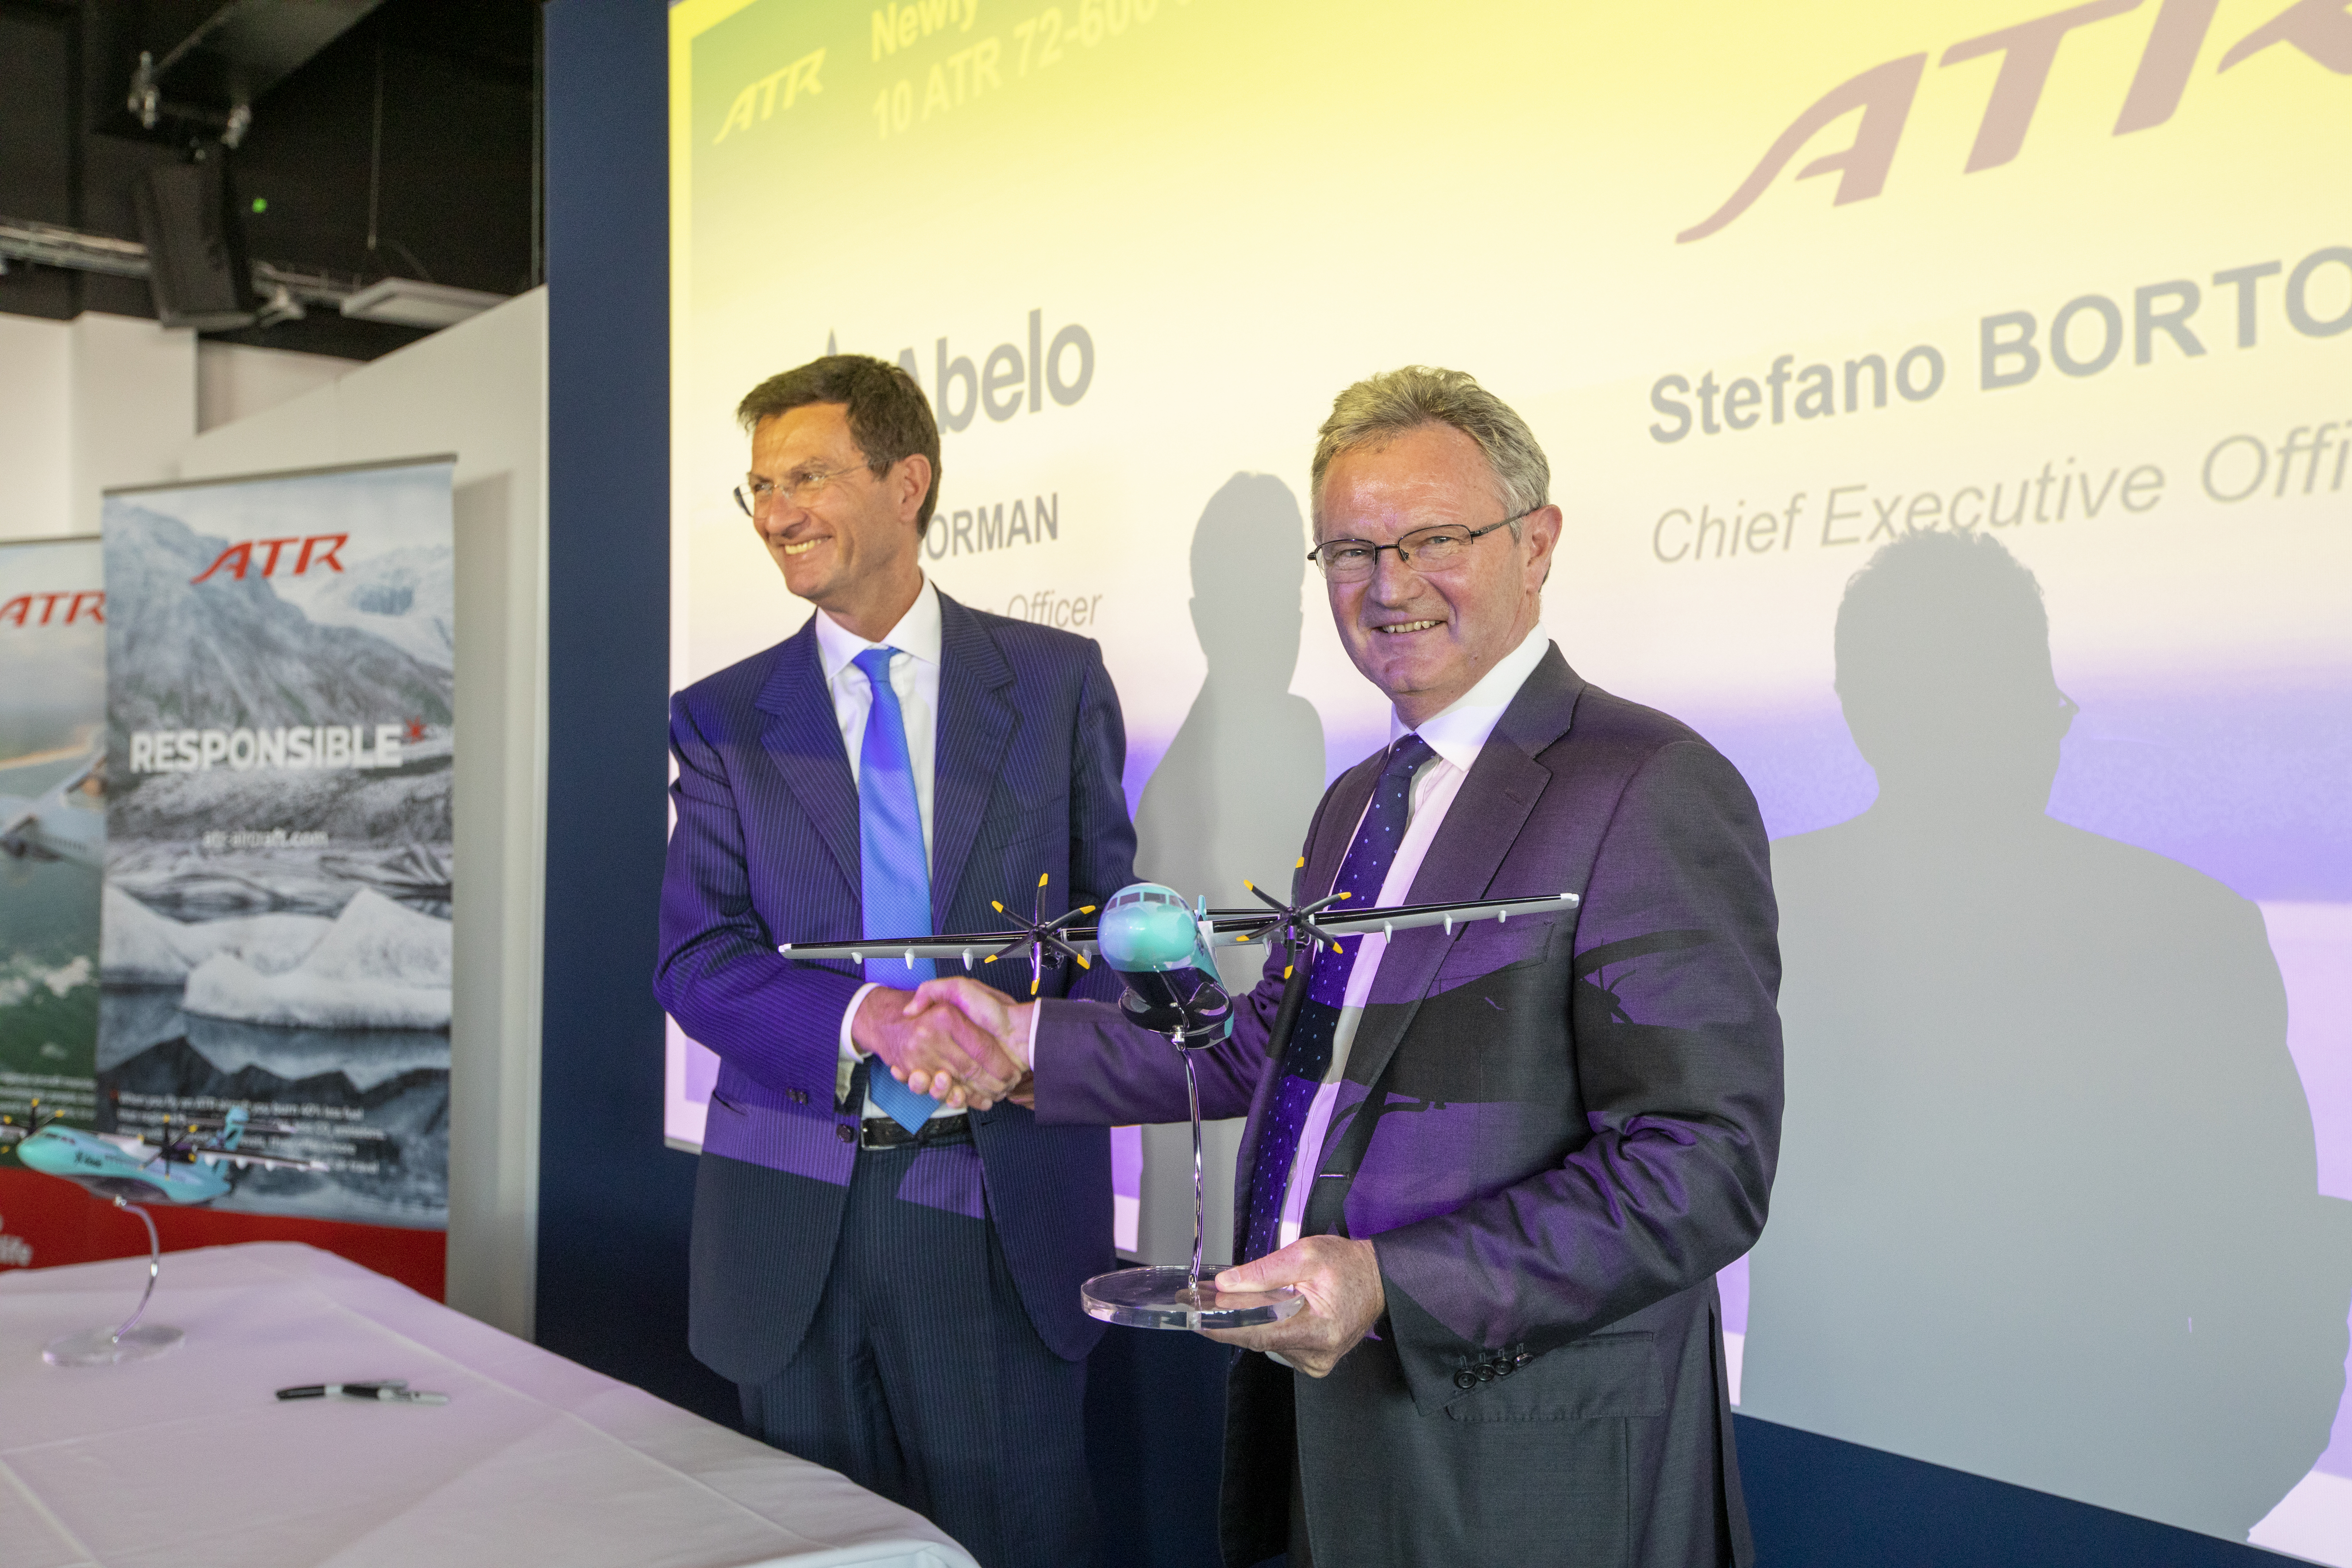 FIA2022: New Lessor Abelo signs agreement for 20 ATR aircraft